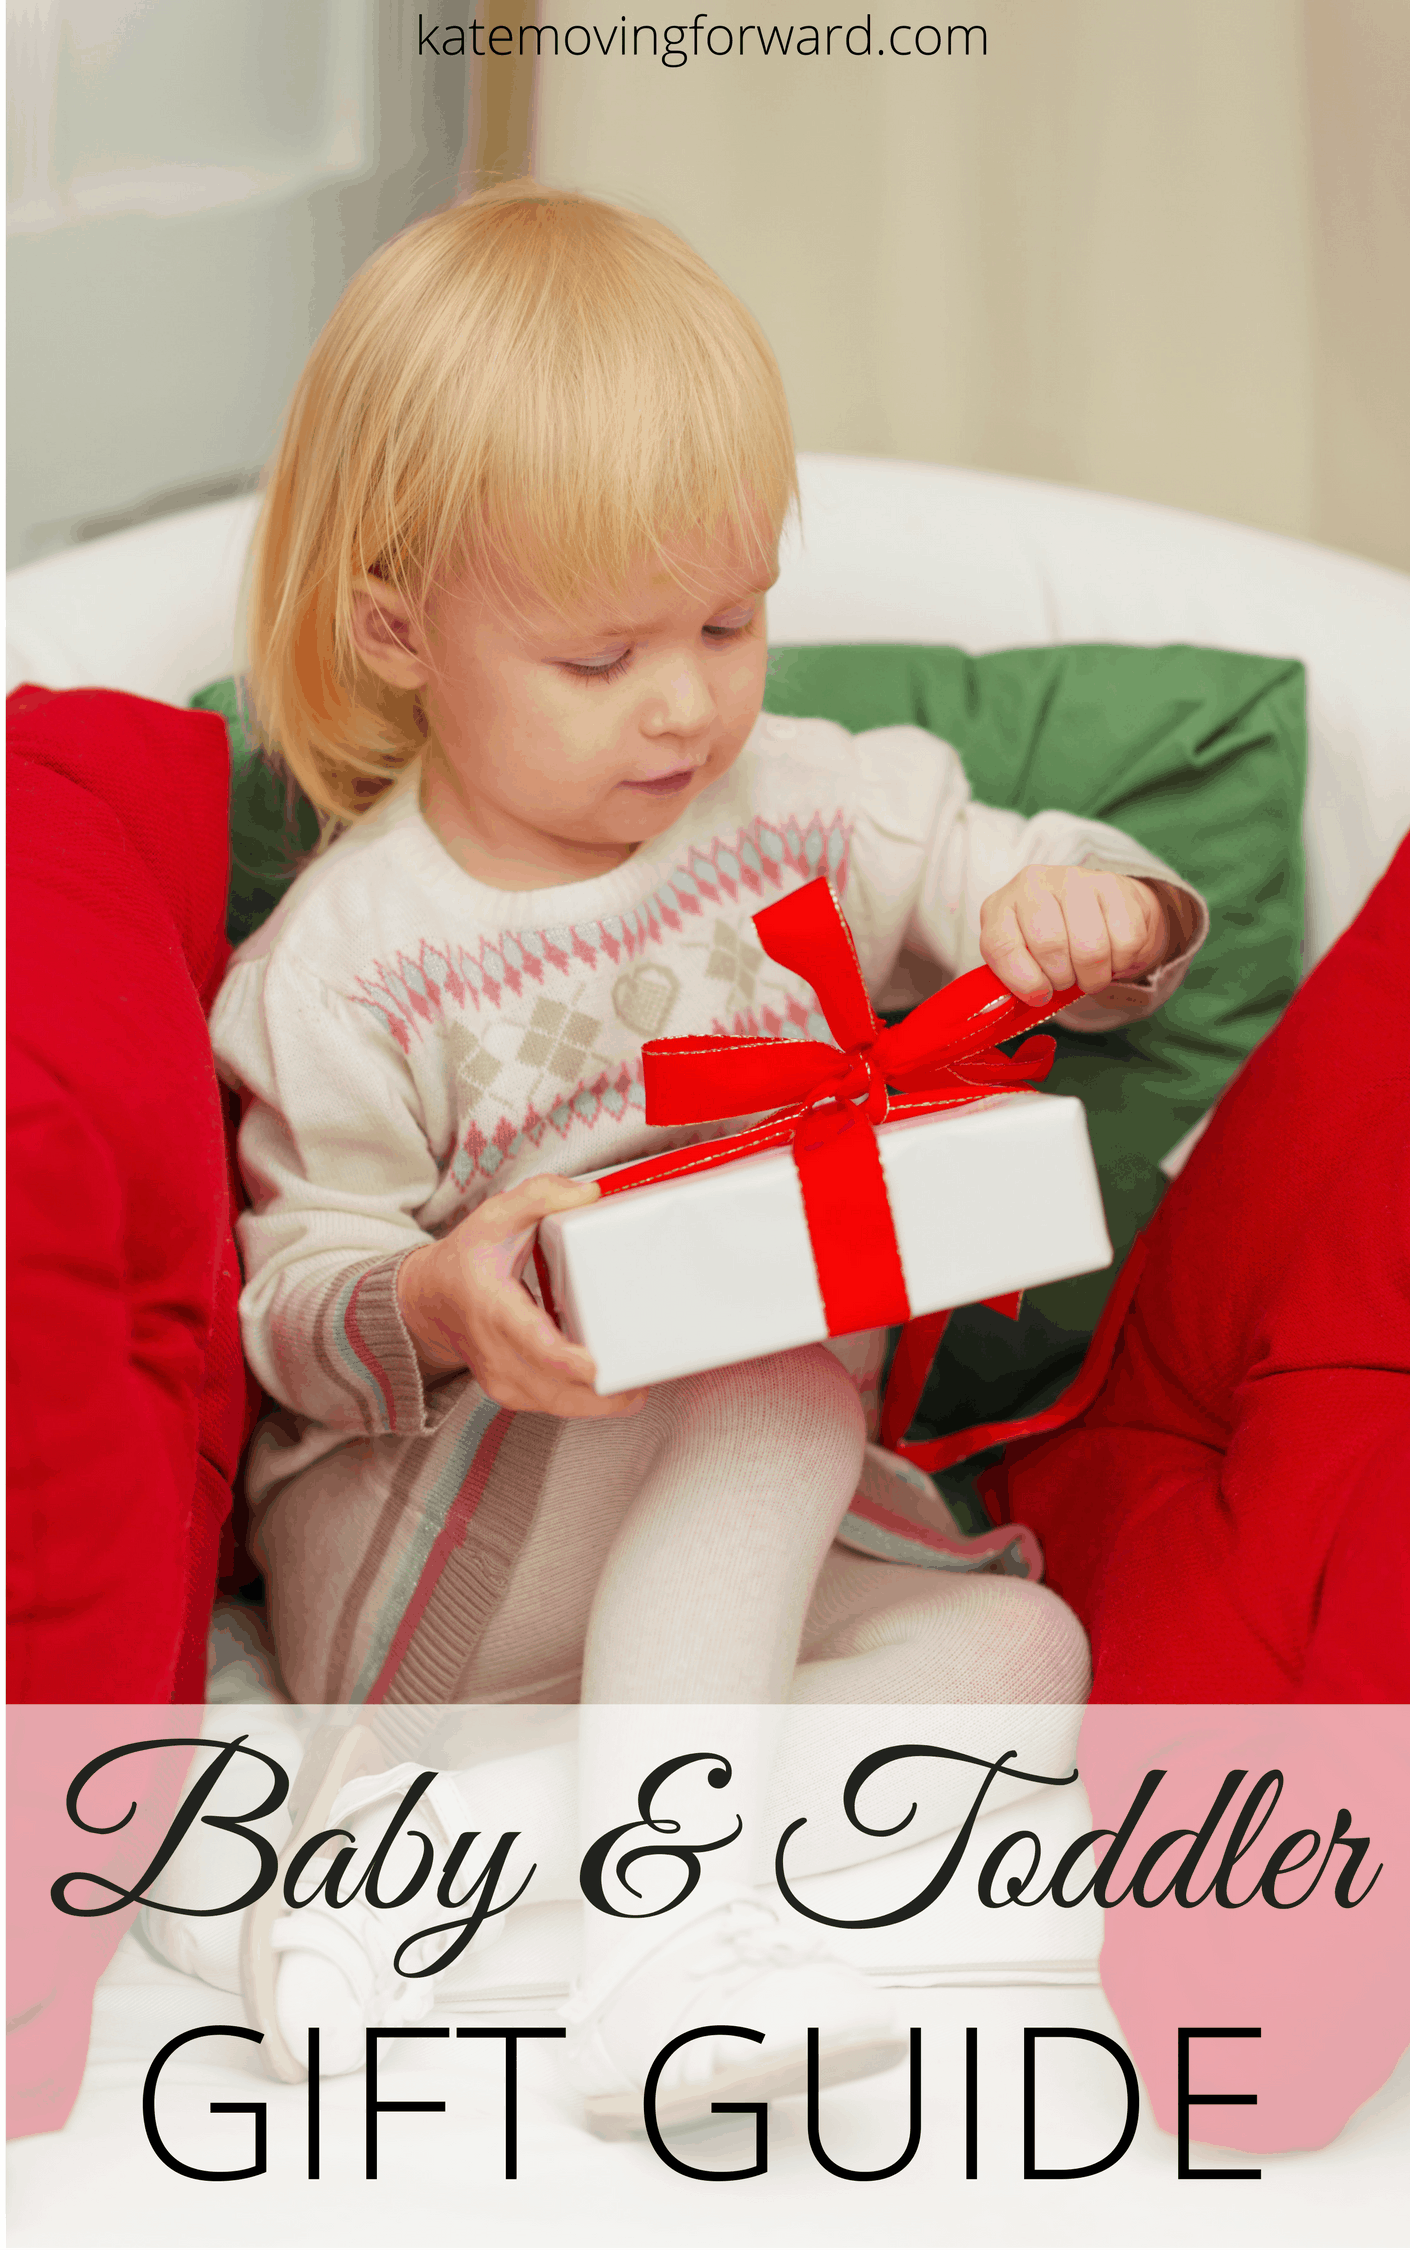 Baby and Toddler Gift Guide - Great ideas for children ages 0-2 for Christmas! Favorite imaginative toys, books, large toys, clothes, and more from experienced moms! 